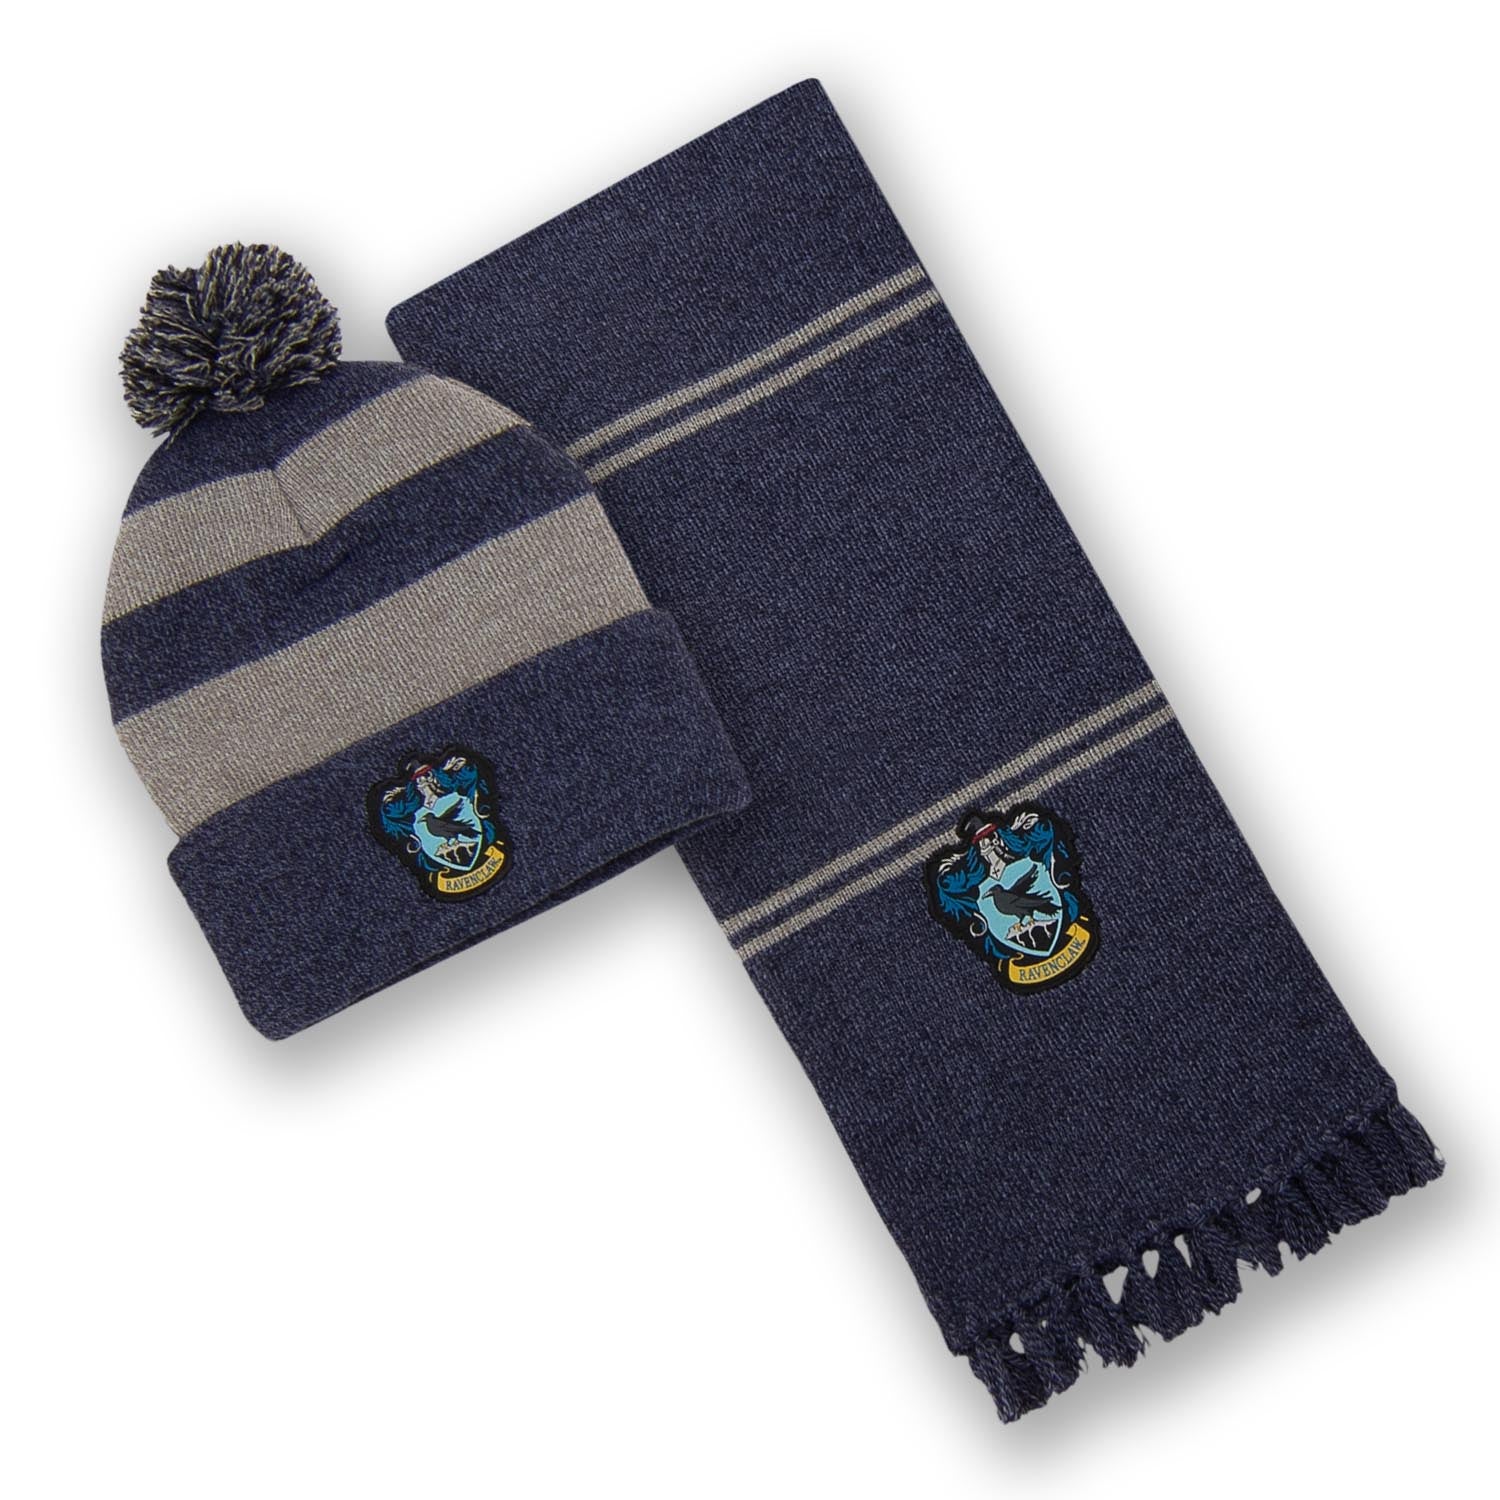 Harry Potter Ravenclaw Adults Hat and Scarf Winter Set